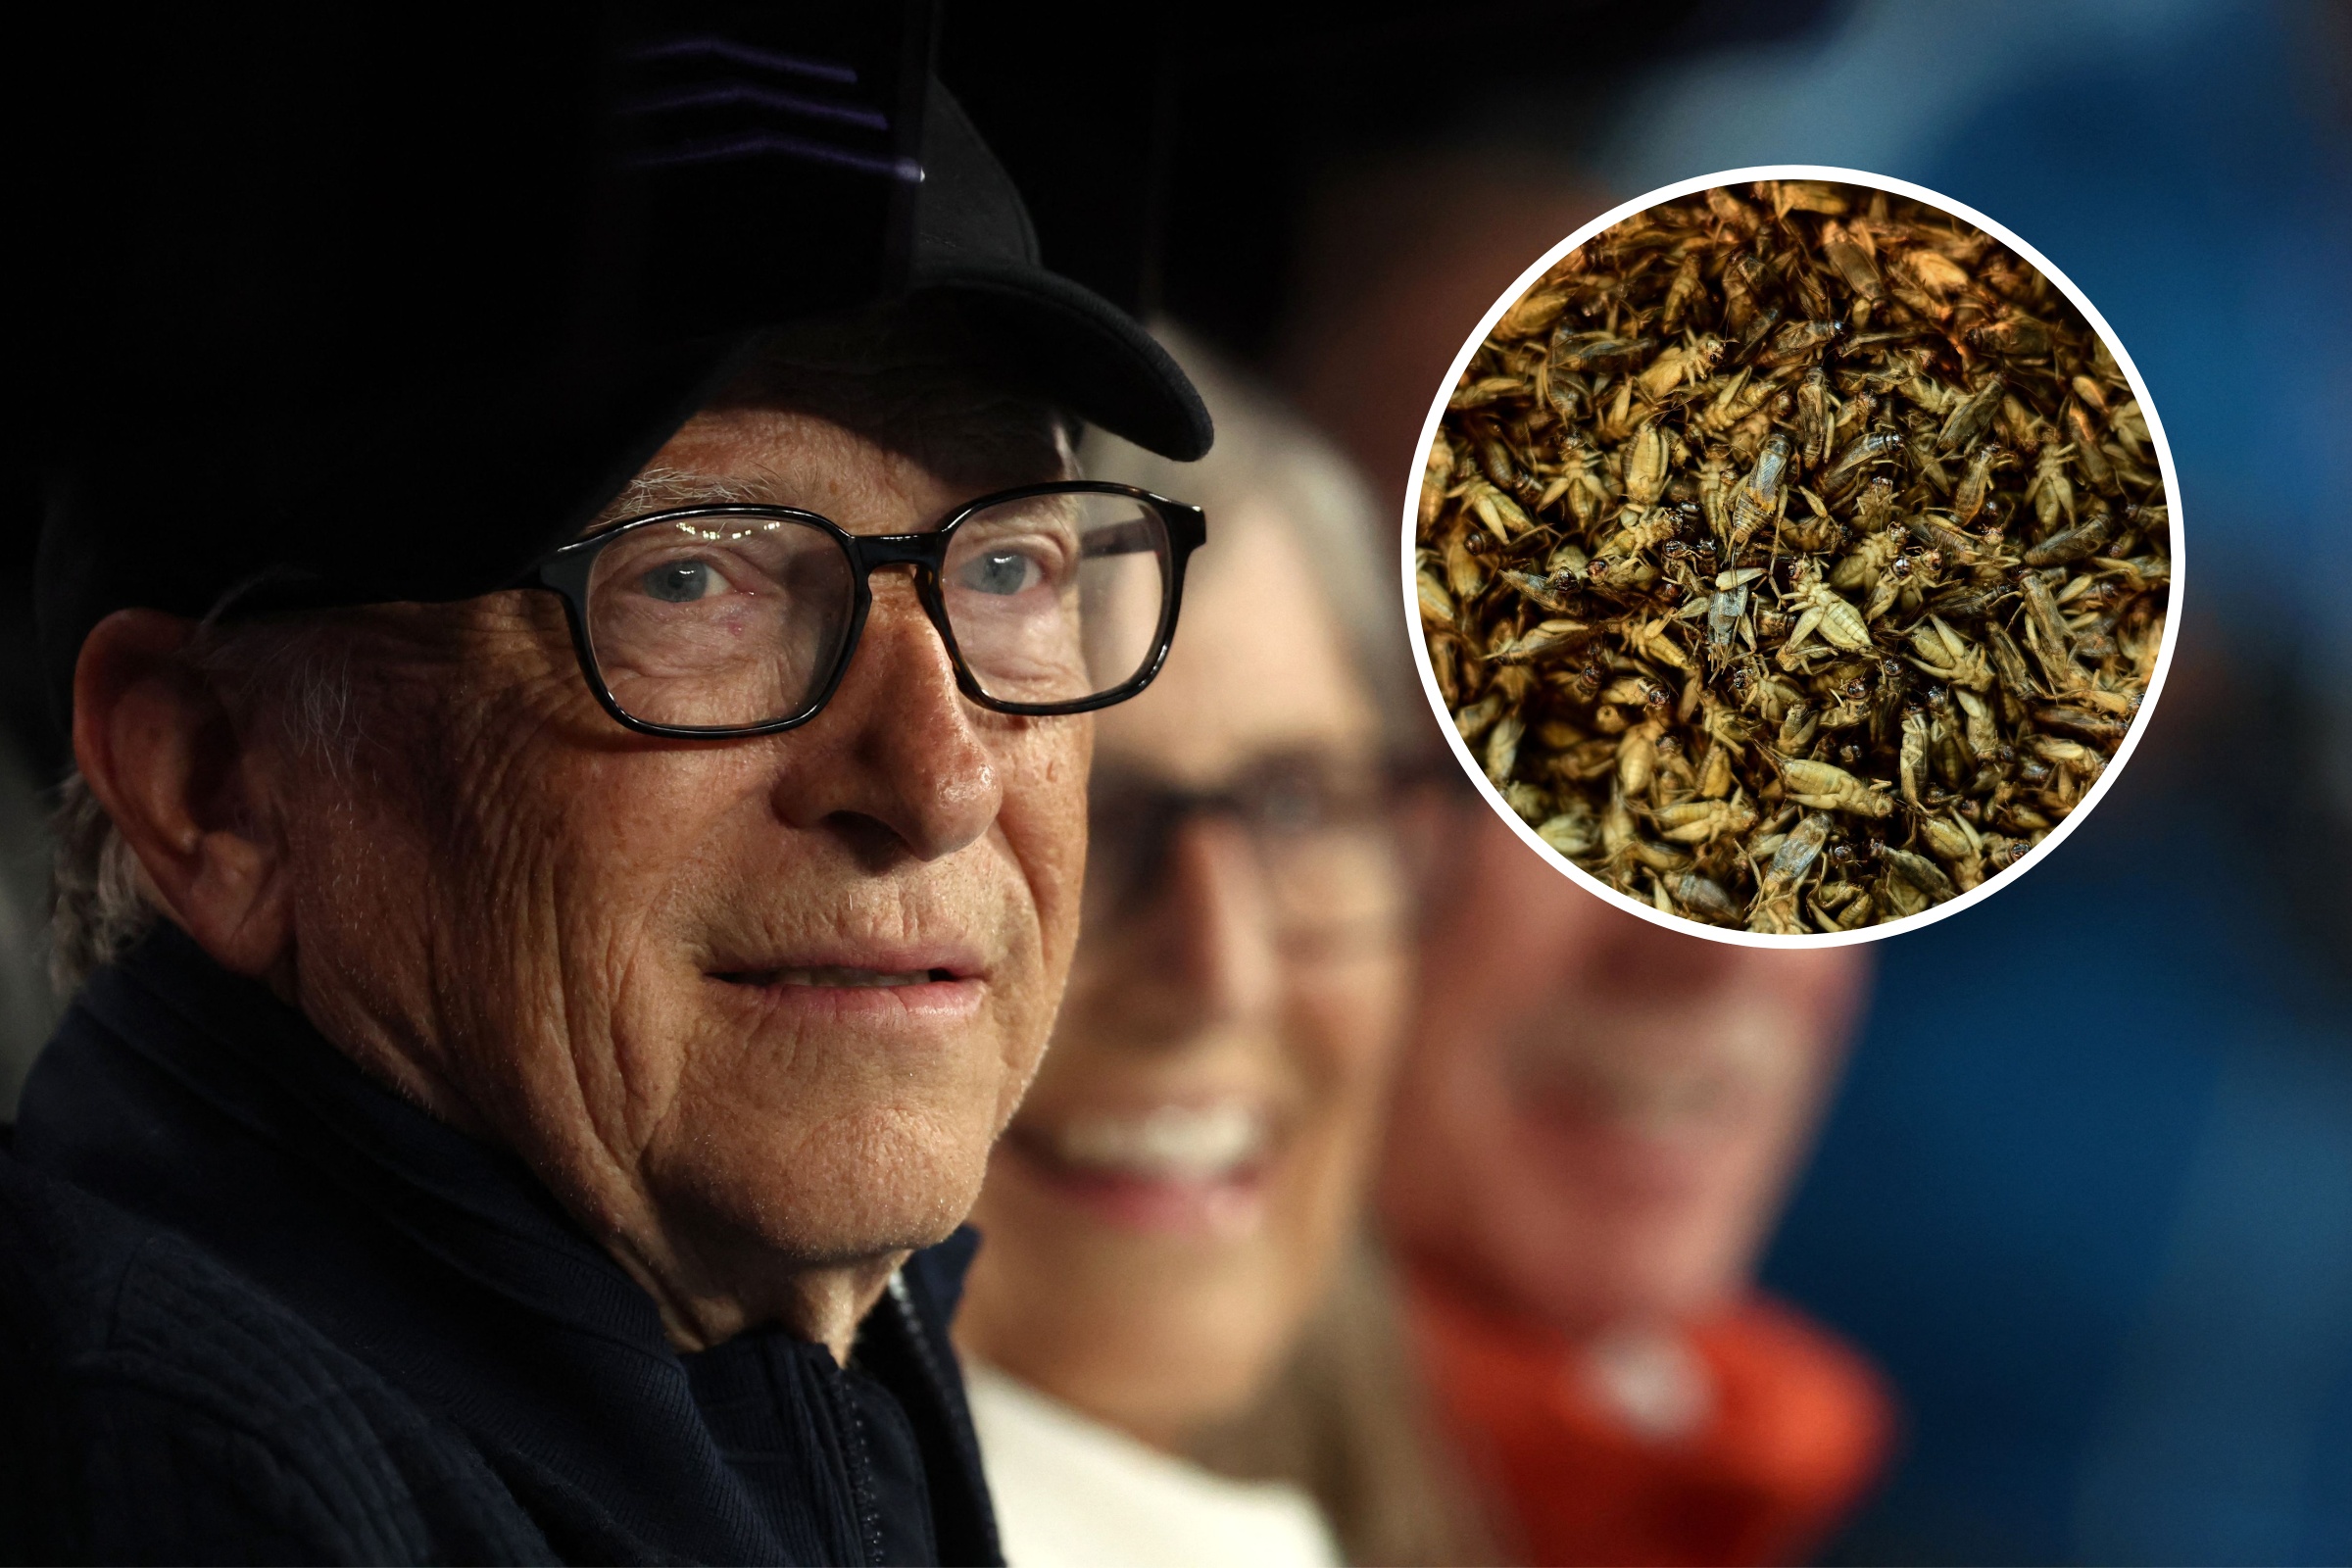 Fact Check: Has Bill Gates advised eating crickets to “stay healthy”?